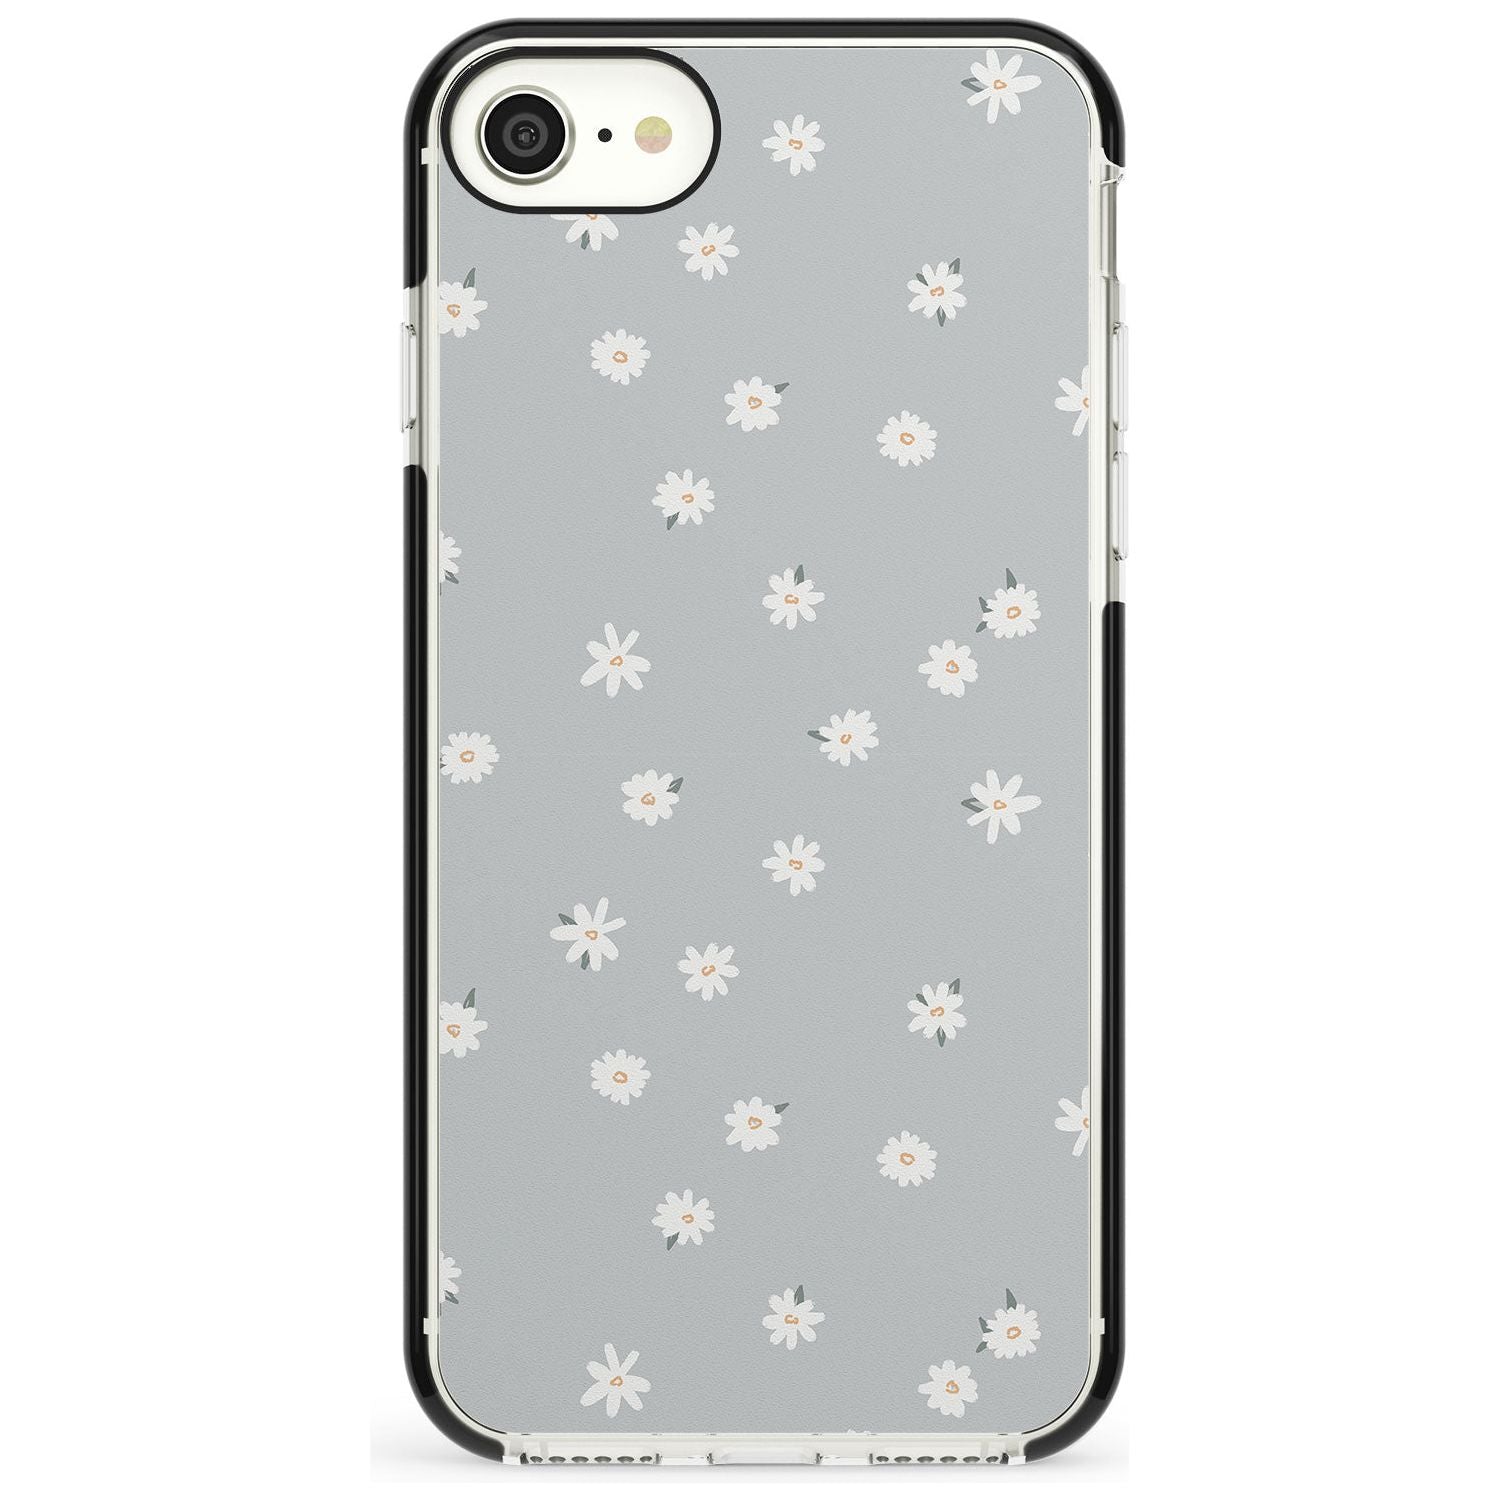 Painted Daises - Blue-Grey Cute Floral Design Pink Fade Impact Phone Case for iPhone SE 8 7 Plus